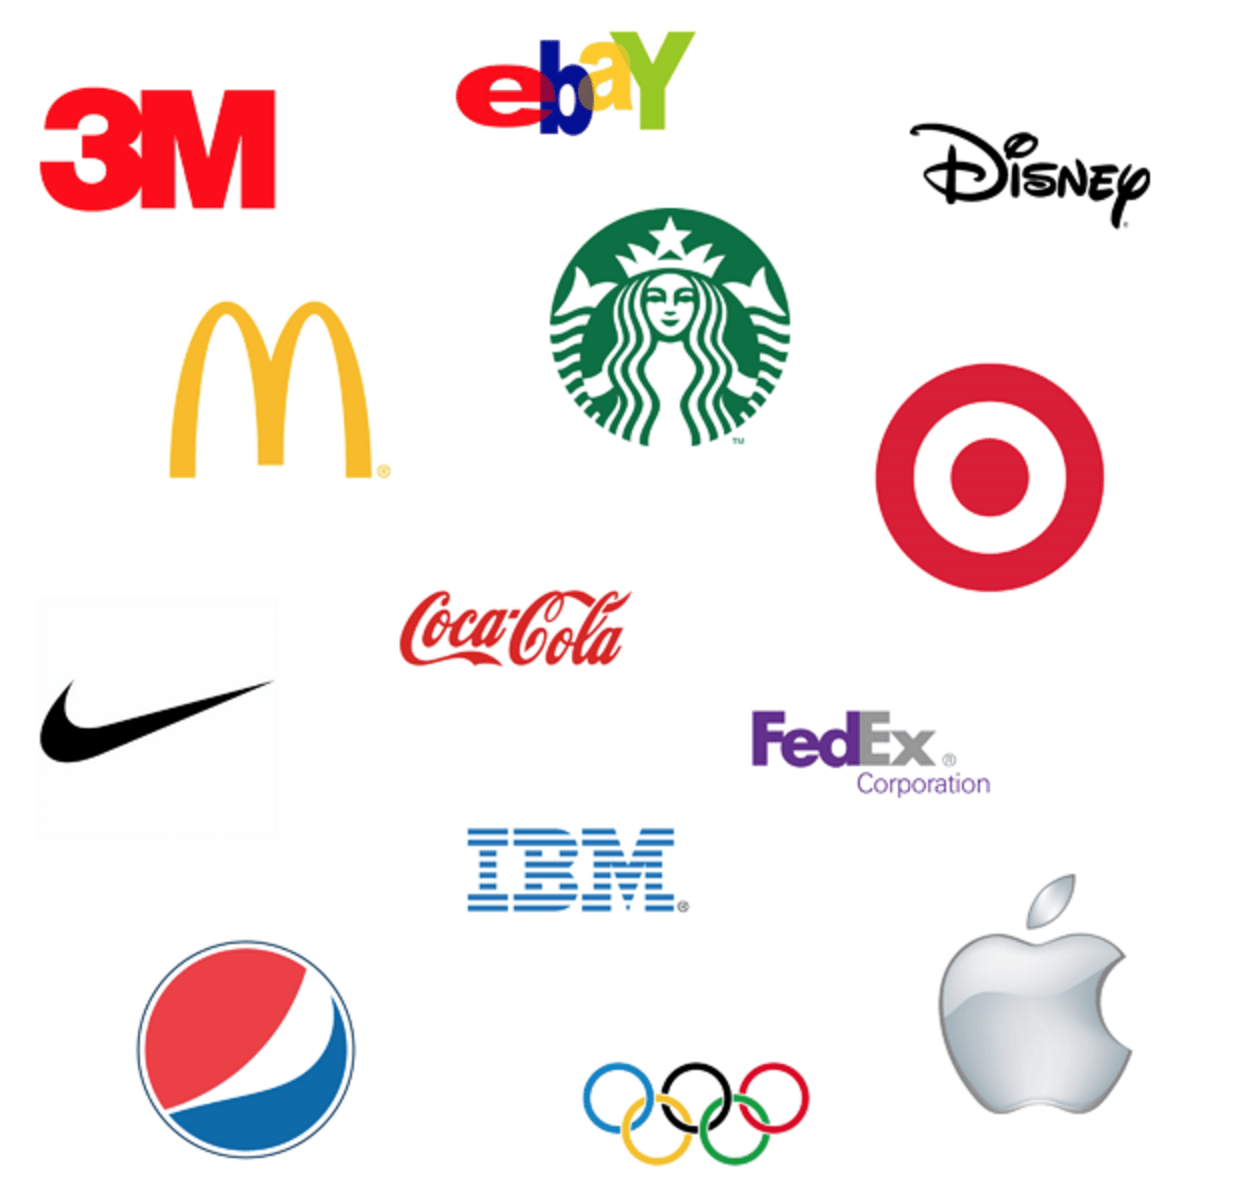 Most Recognized Brand Logo - Source: http://www.impactbnd.com/blog/21-recognizable-brand-logos ...